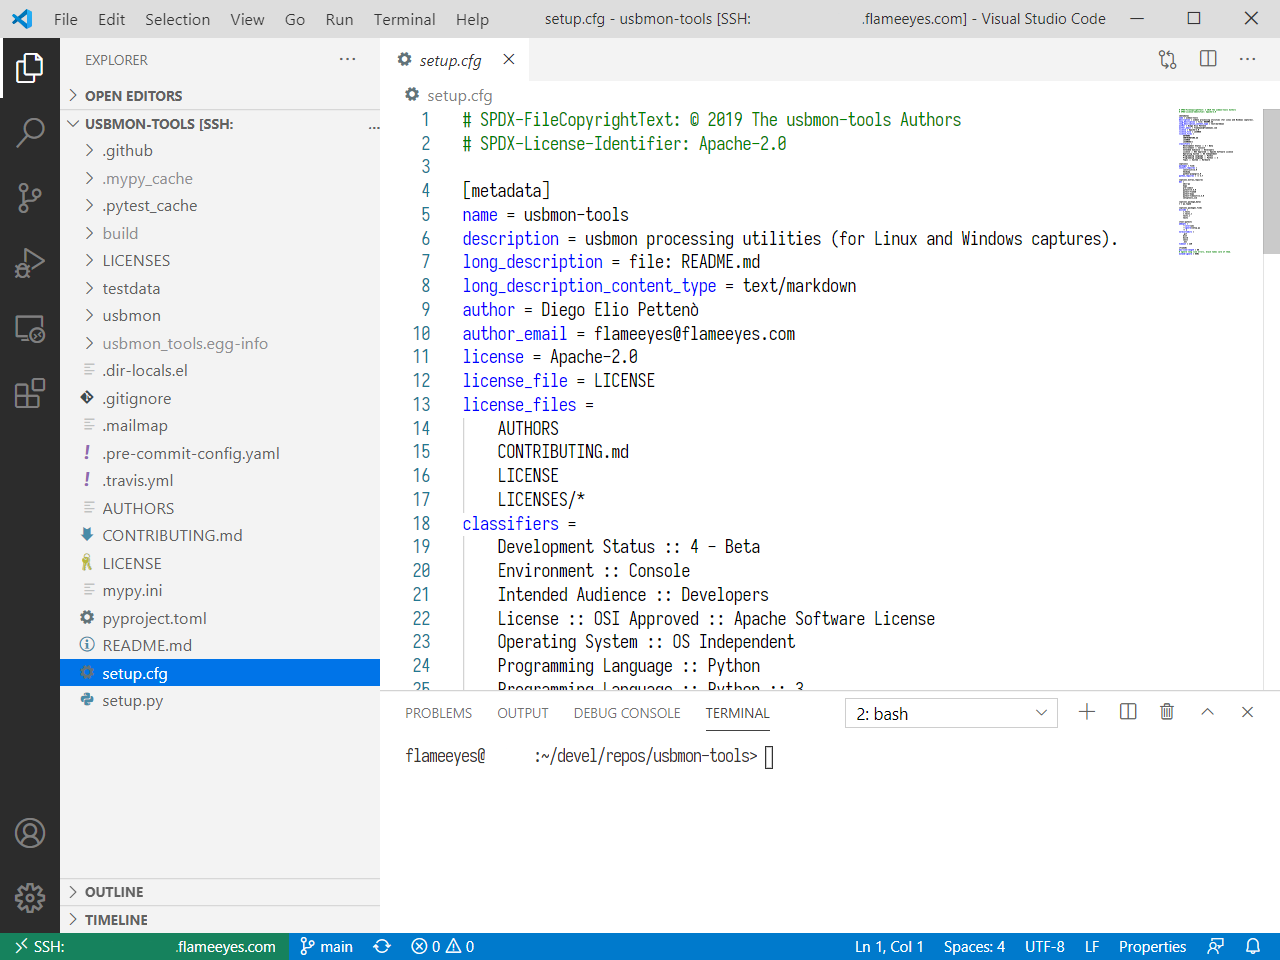 Screenshot of Visual Studio Code showing a remote SSH connection to my Linux NUC with usbmon-tool open.